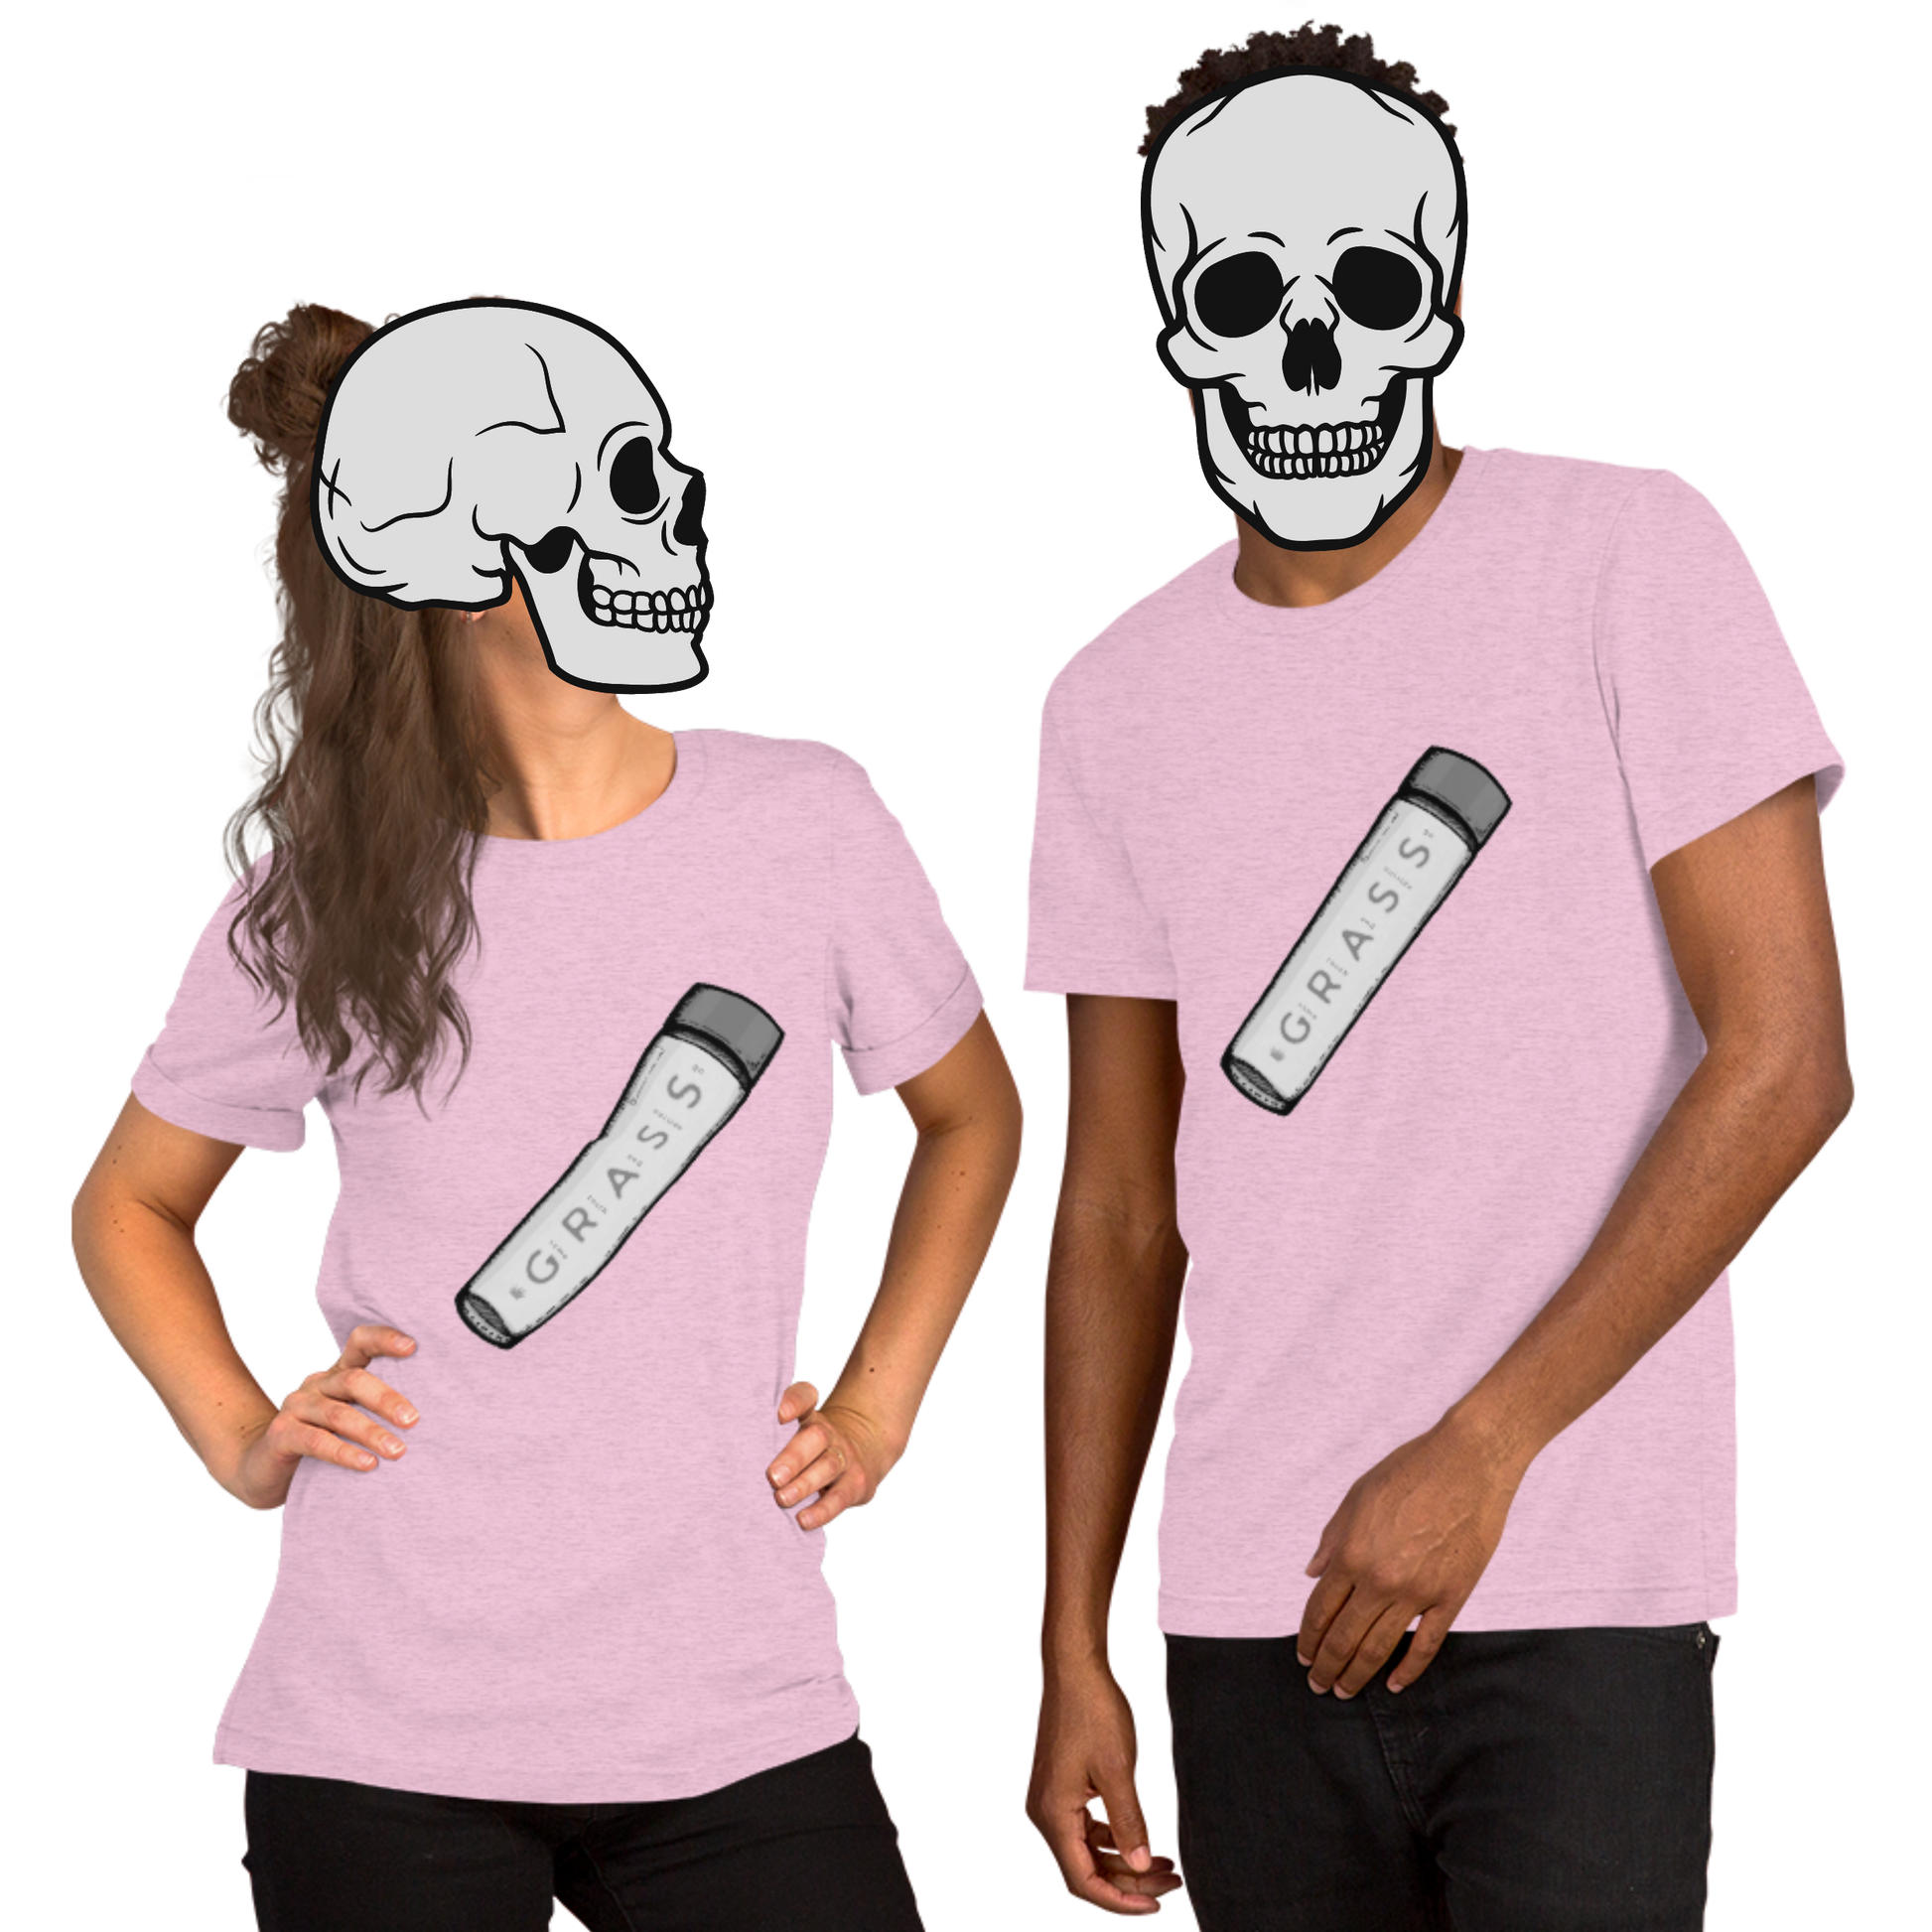 touch some grass t-shirt models in pink - gaslit apparel